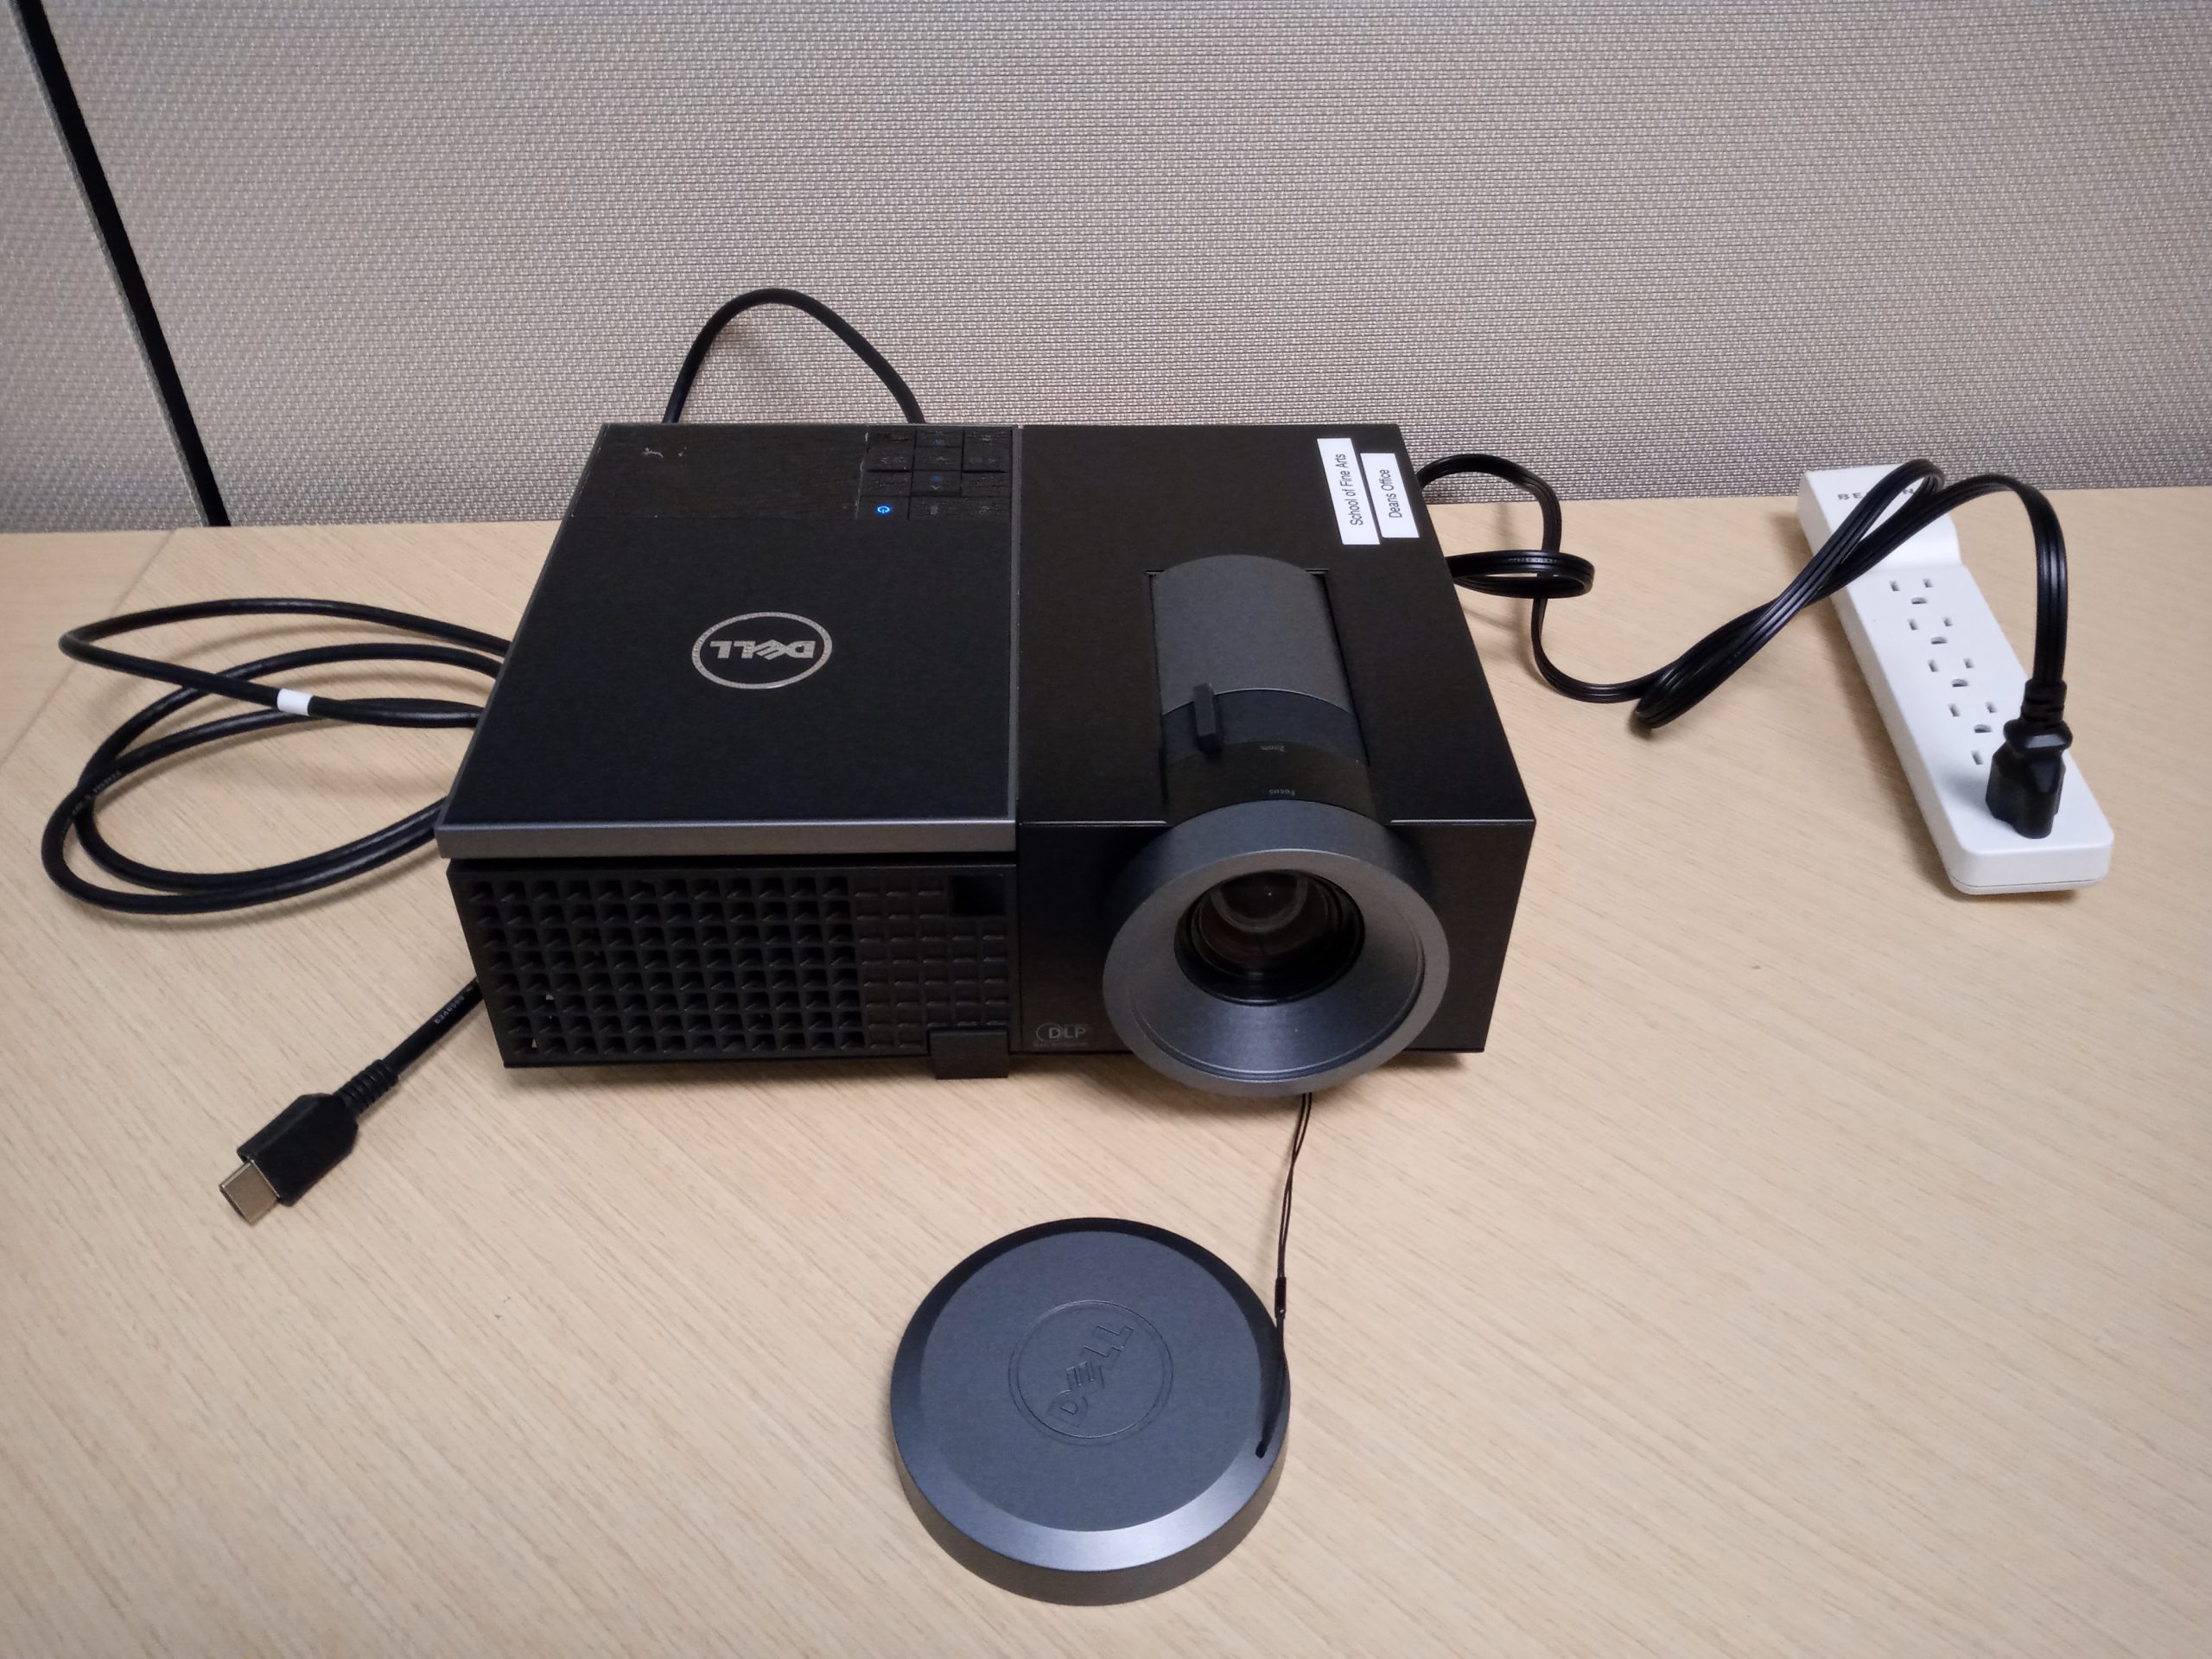 Dell 4320 projector